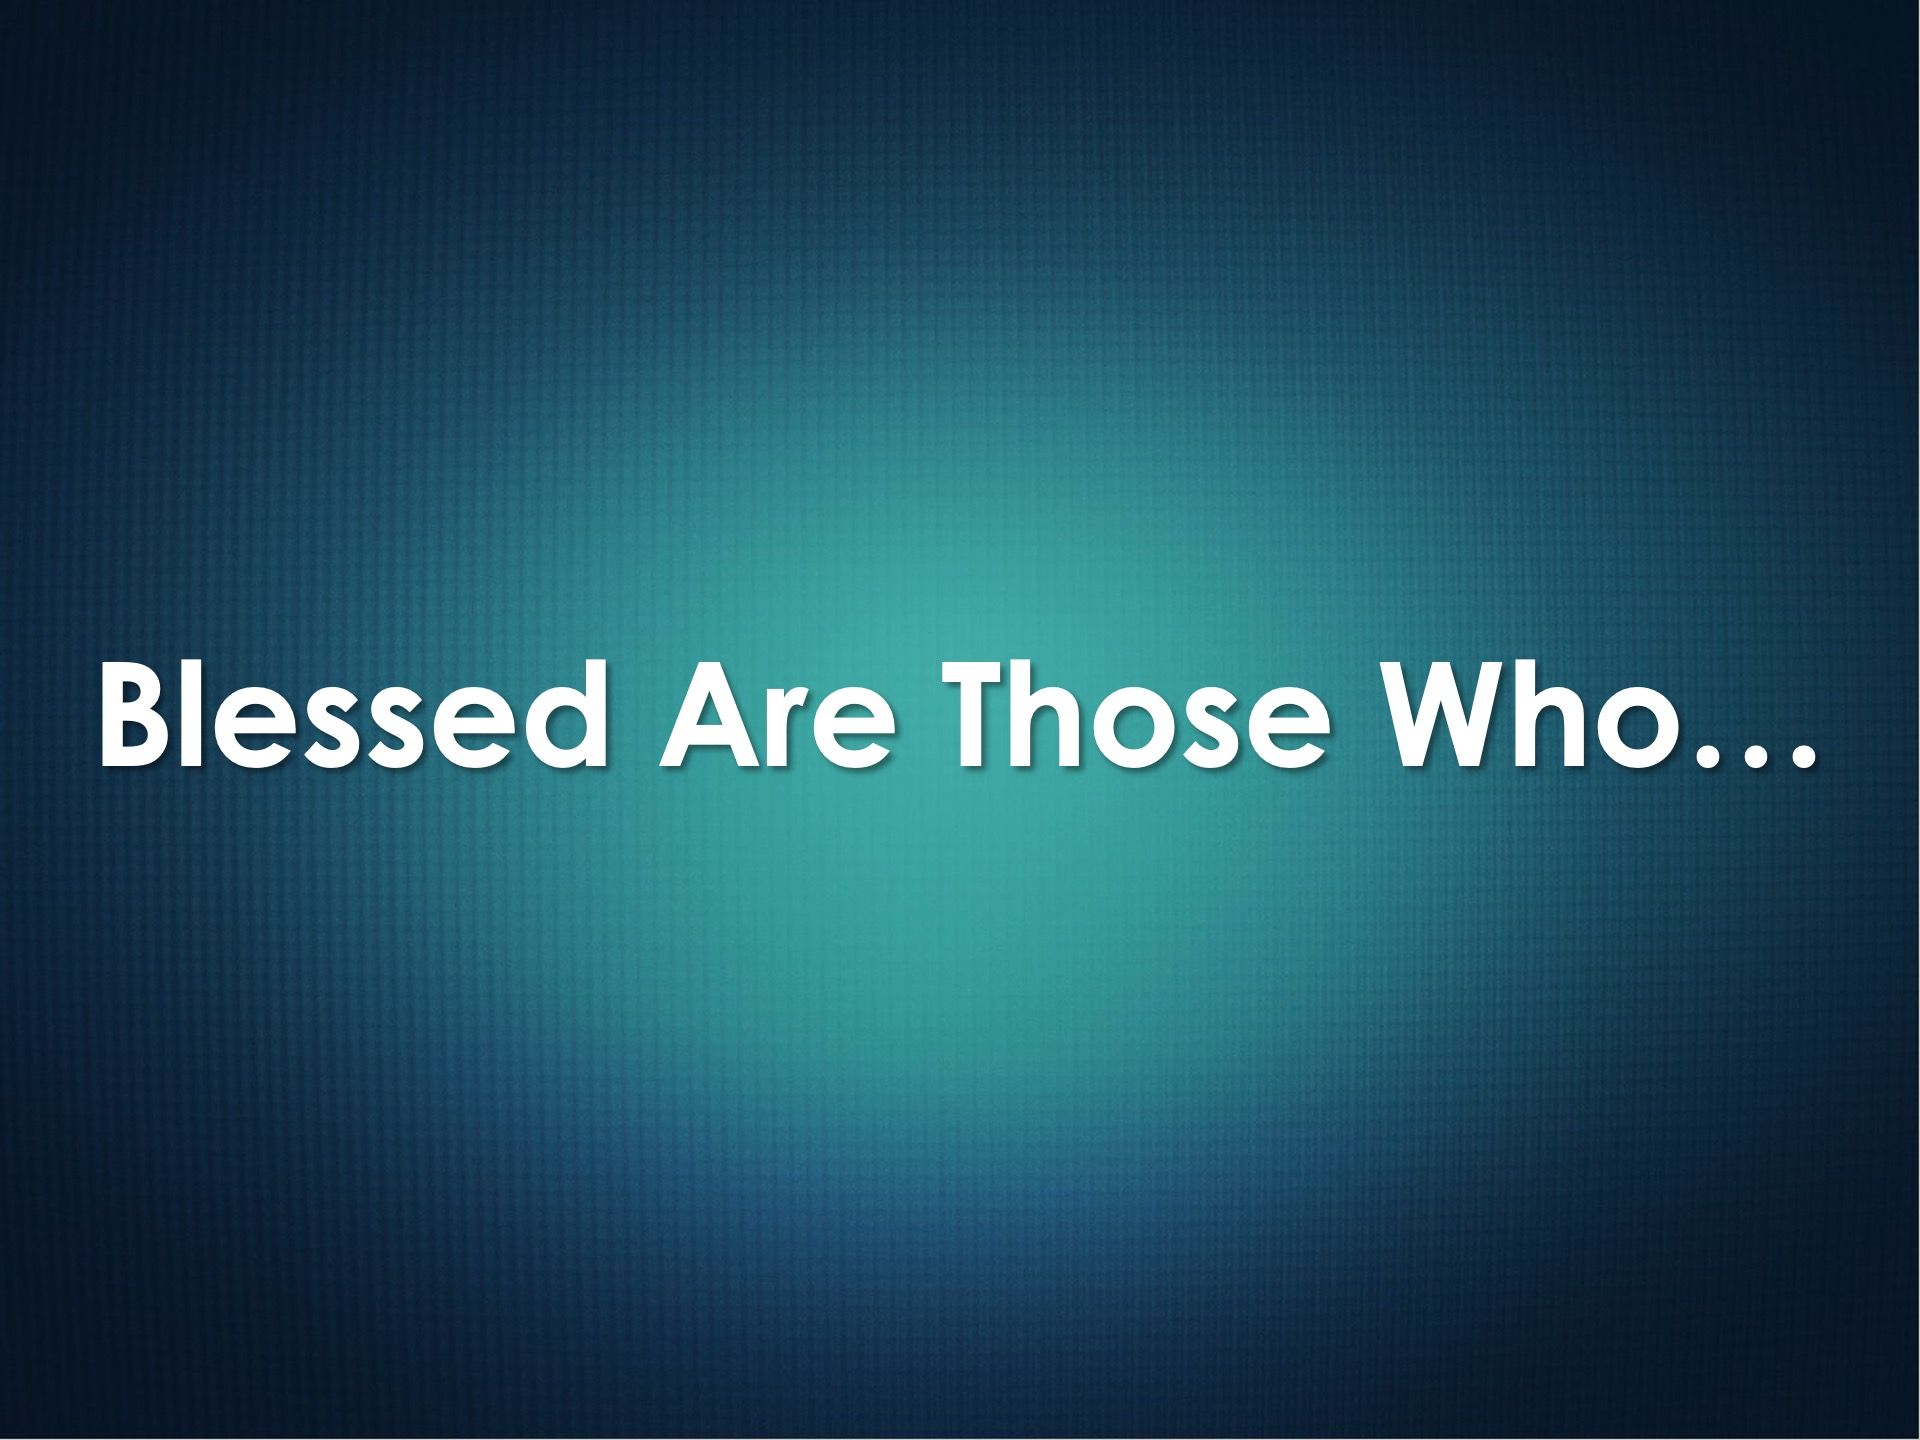 Blessed Are Those Who